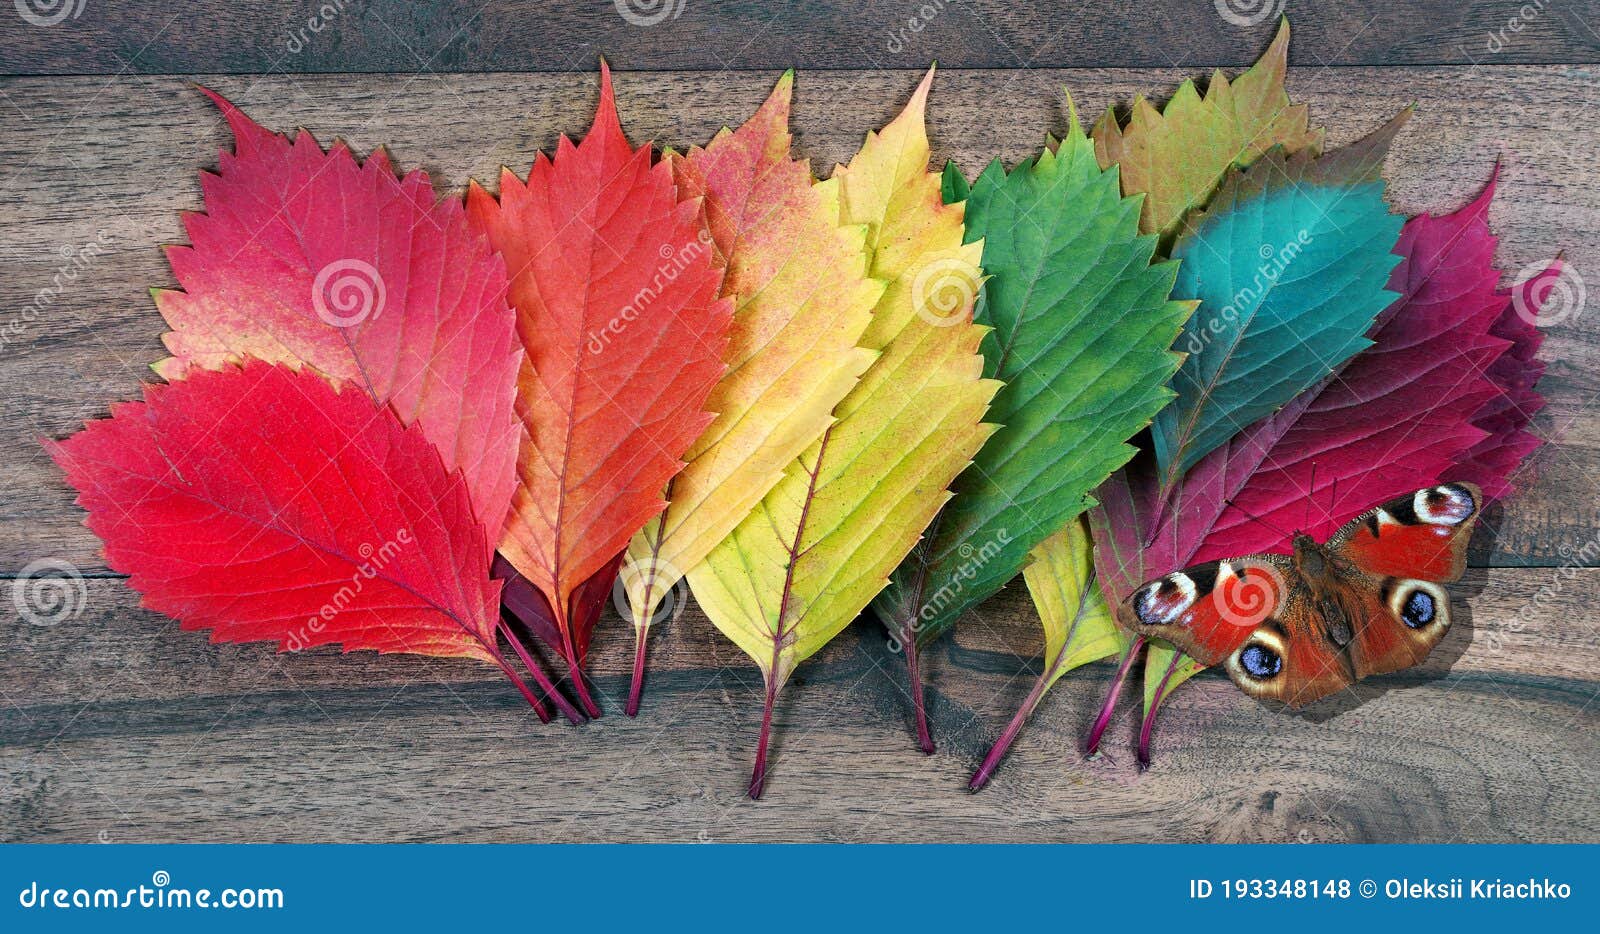 Colors of Rainbow. Colorful Autumn Leaves and Bright Butterfly on ...